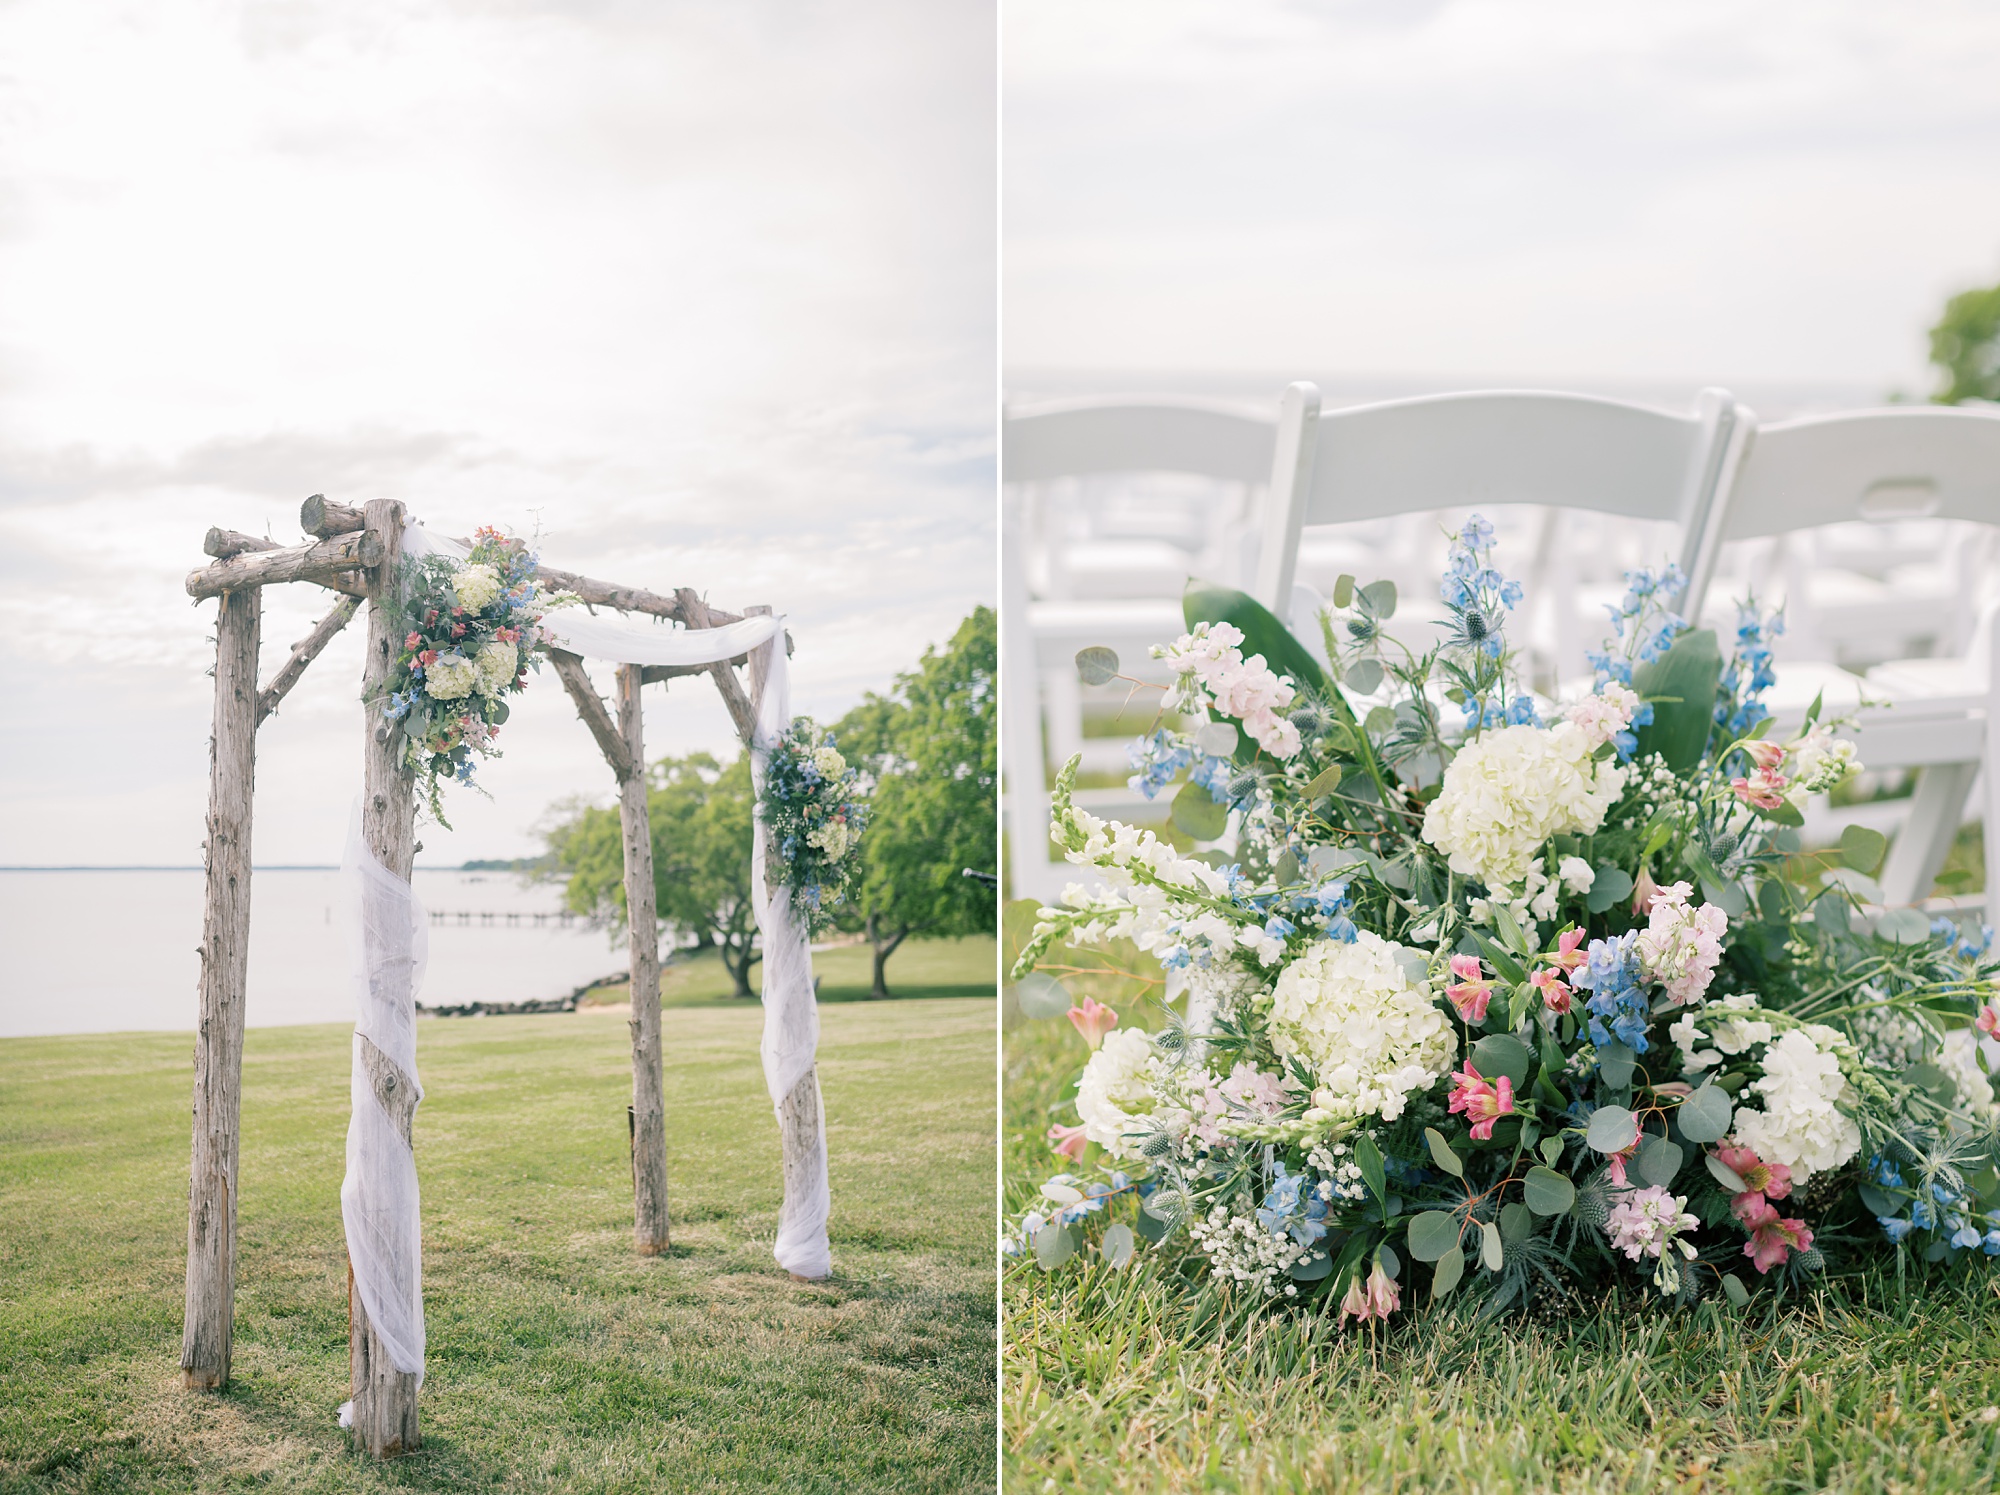 wedding ceremony on lawn with pink, white and blue floral arrangements on aisle